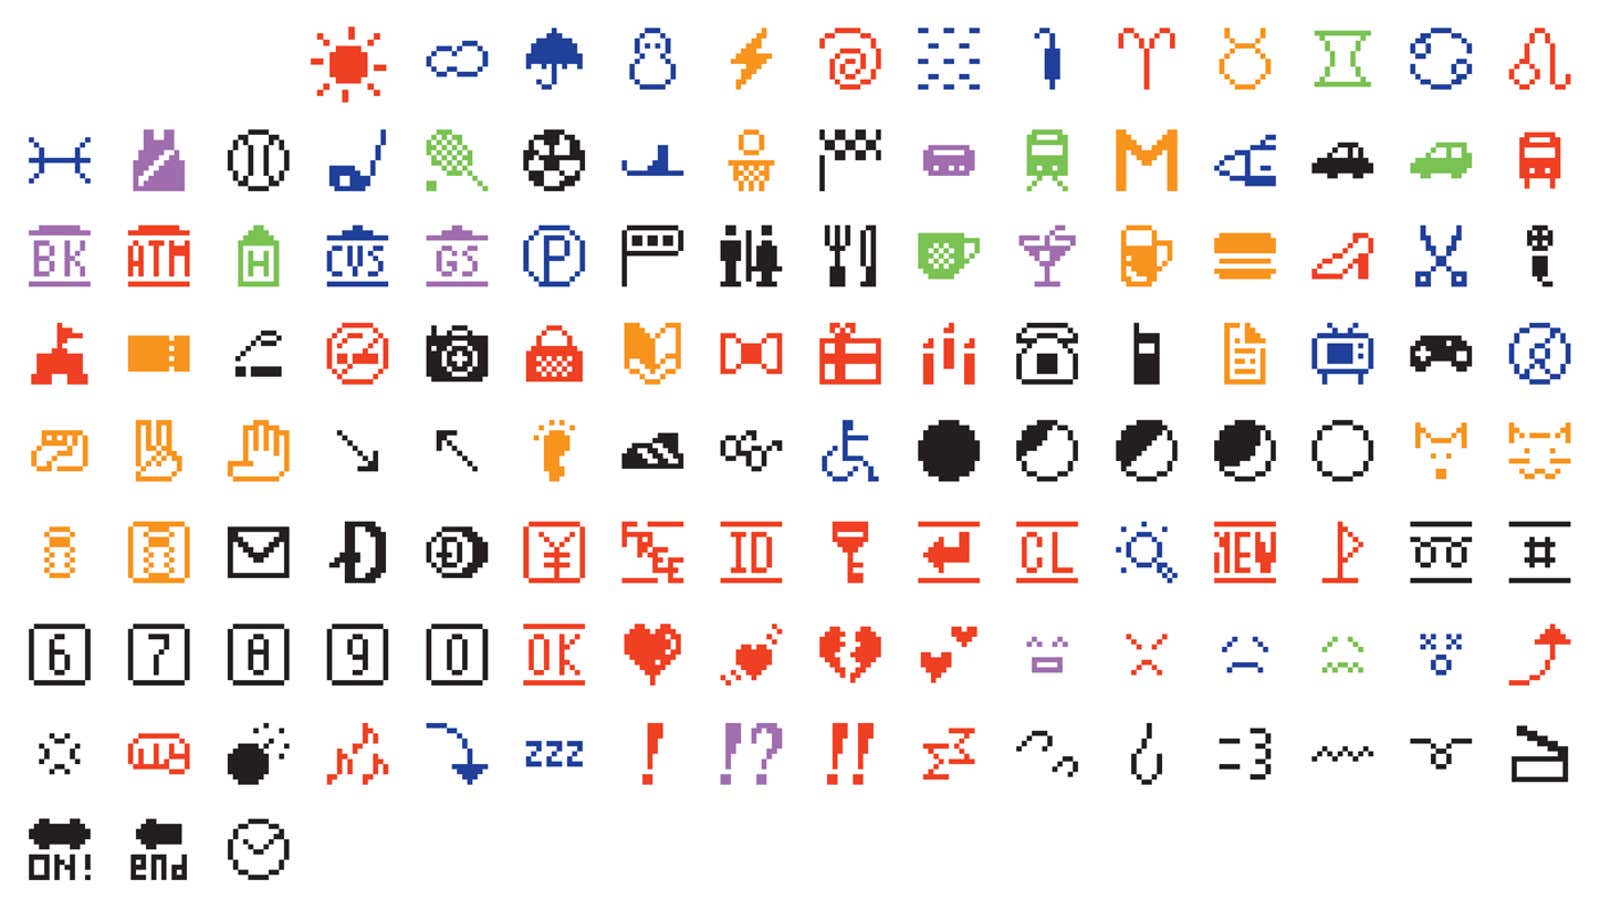 The first-ever emoji designs have been recognized as contemporary art alongside Warhols and Pollocks